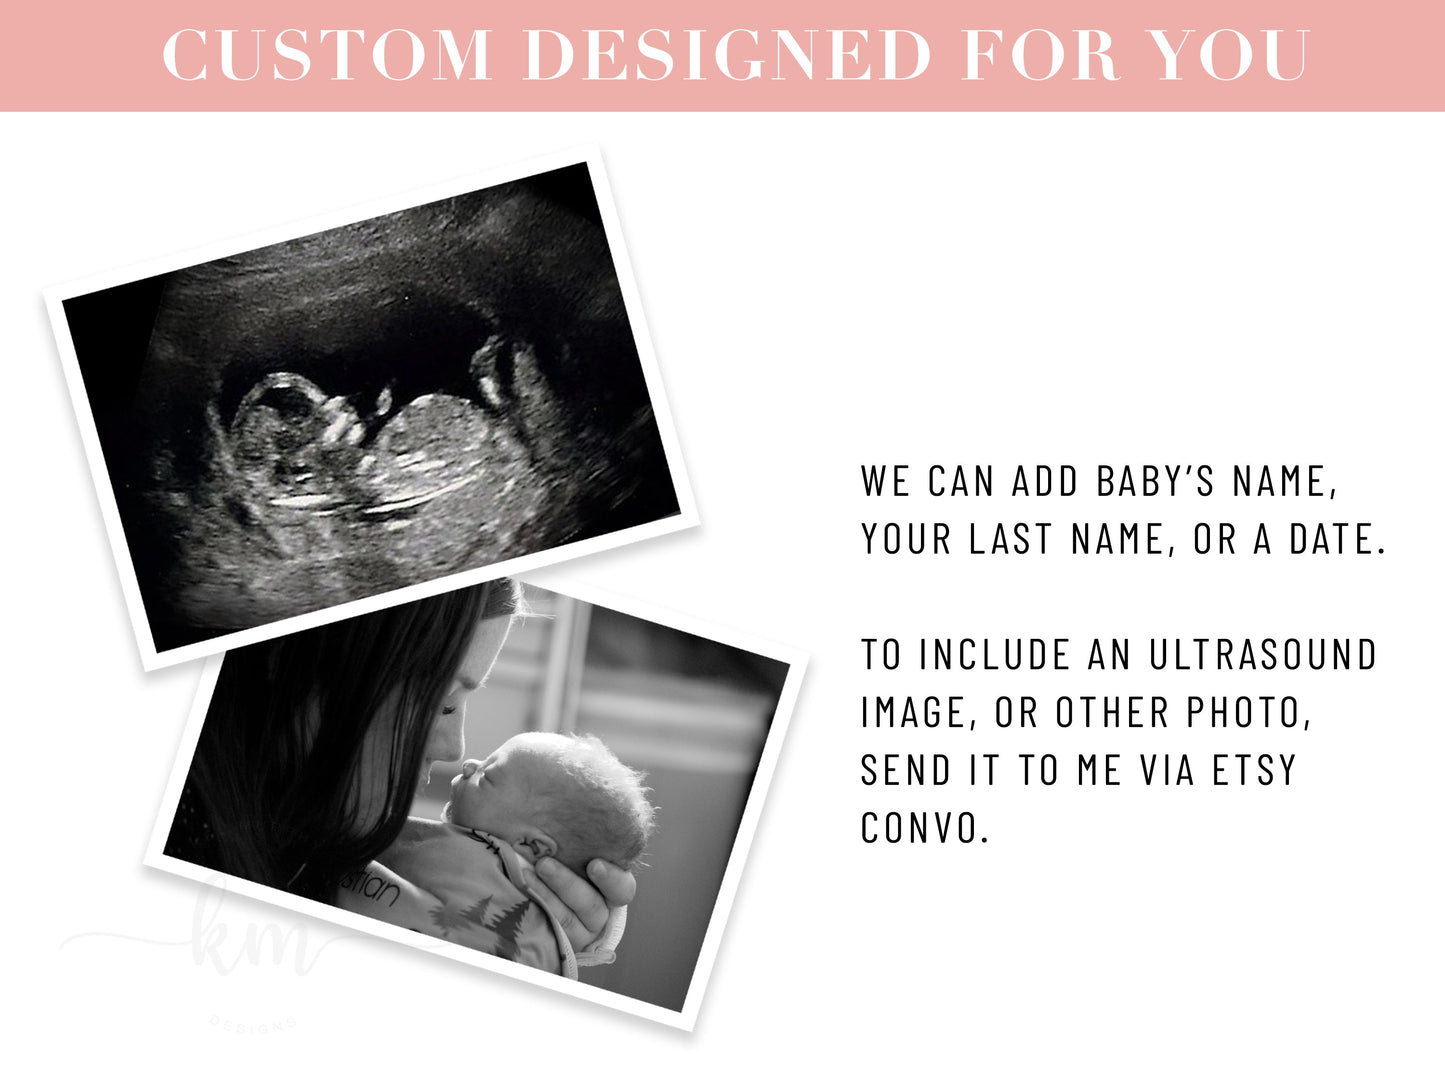 Baby Loss, Pregnancy Loss Announcement is custom designed for you. We can use your ultrasound image or photo.